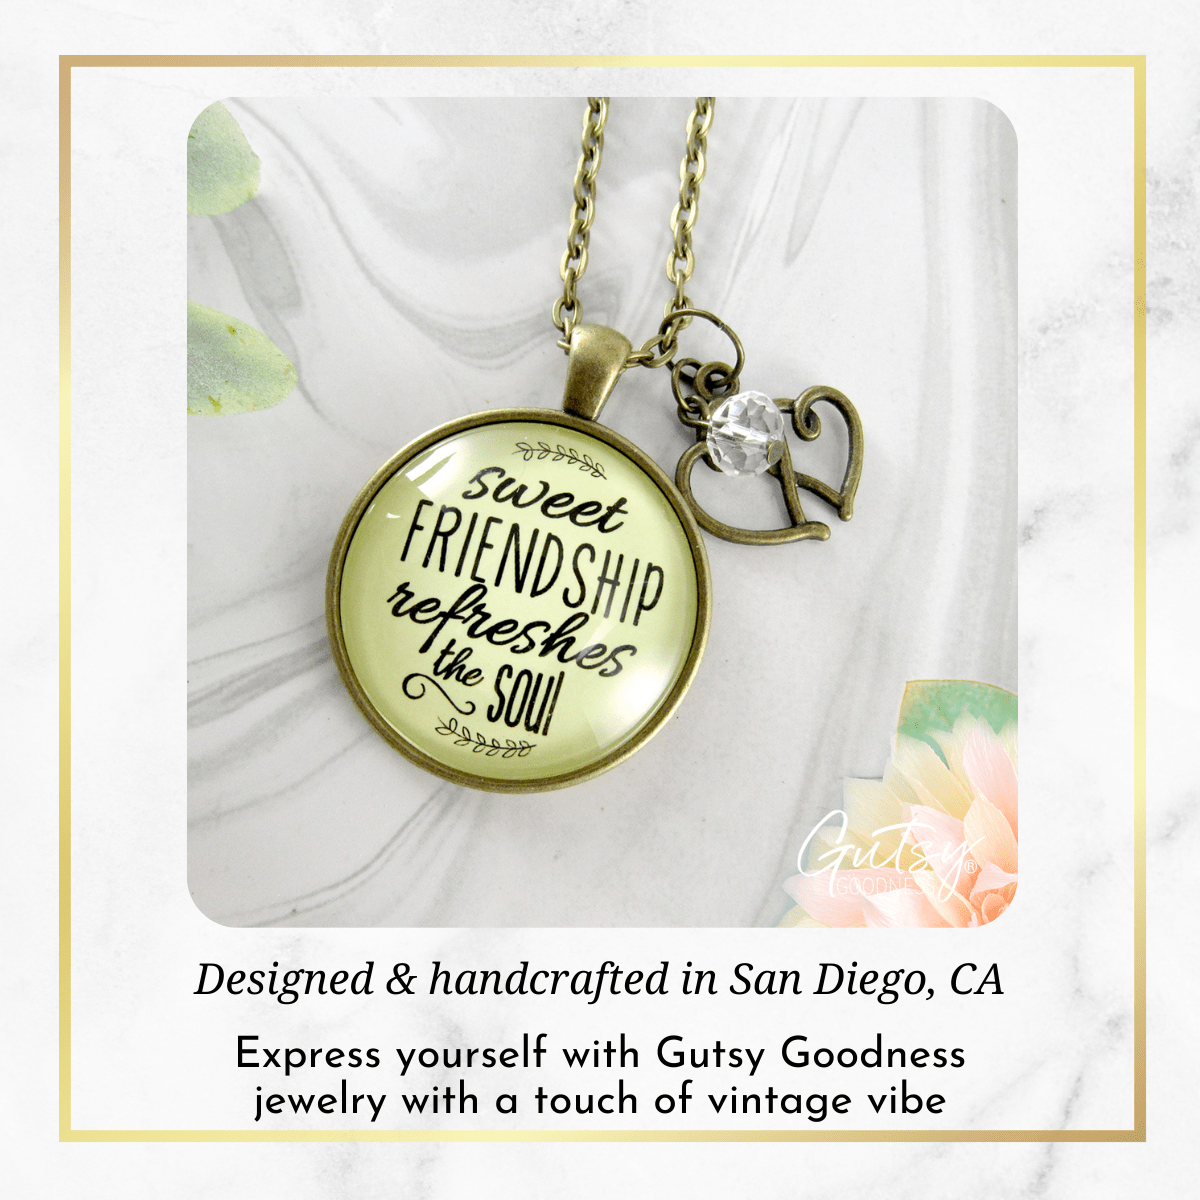 Gutsy Goodness Friendship Necklace Sweet Refreshes Soul Faith Life Quote Jewelry - Gutsy Goodness Handmade Jewelry;Friendship Necklace Sweet Refreshes Soul Faith Life Quote Jewelry - Gutsy Goodness Handmade Jewelry Gifts